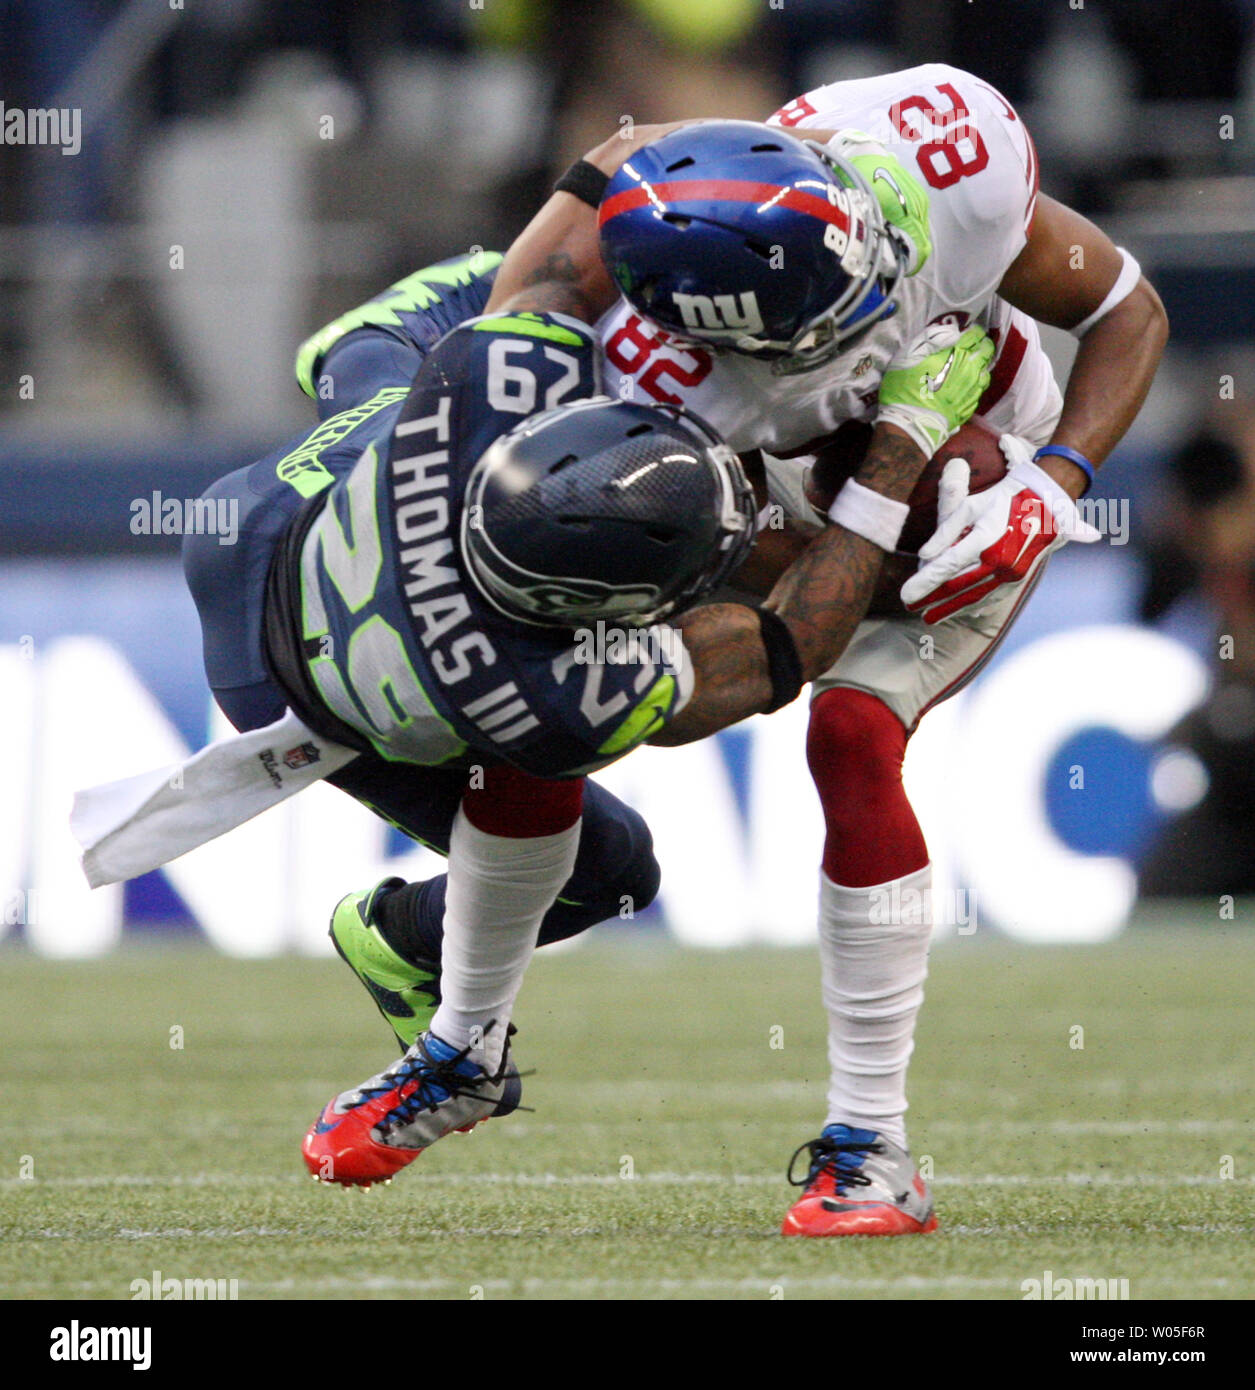 Seattle Seahawks  free safety Earl Thomas (29) tackles New York Giants wide receiver Rueben Randle (82) at CenturyLink Field in Seattle, Washington on November 9, 2014. The Seahawks  beat the Giants 38-17.     UPI/Jim Bryant Stock Photo